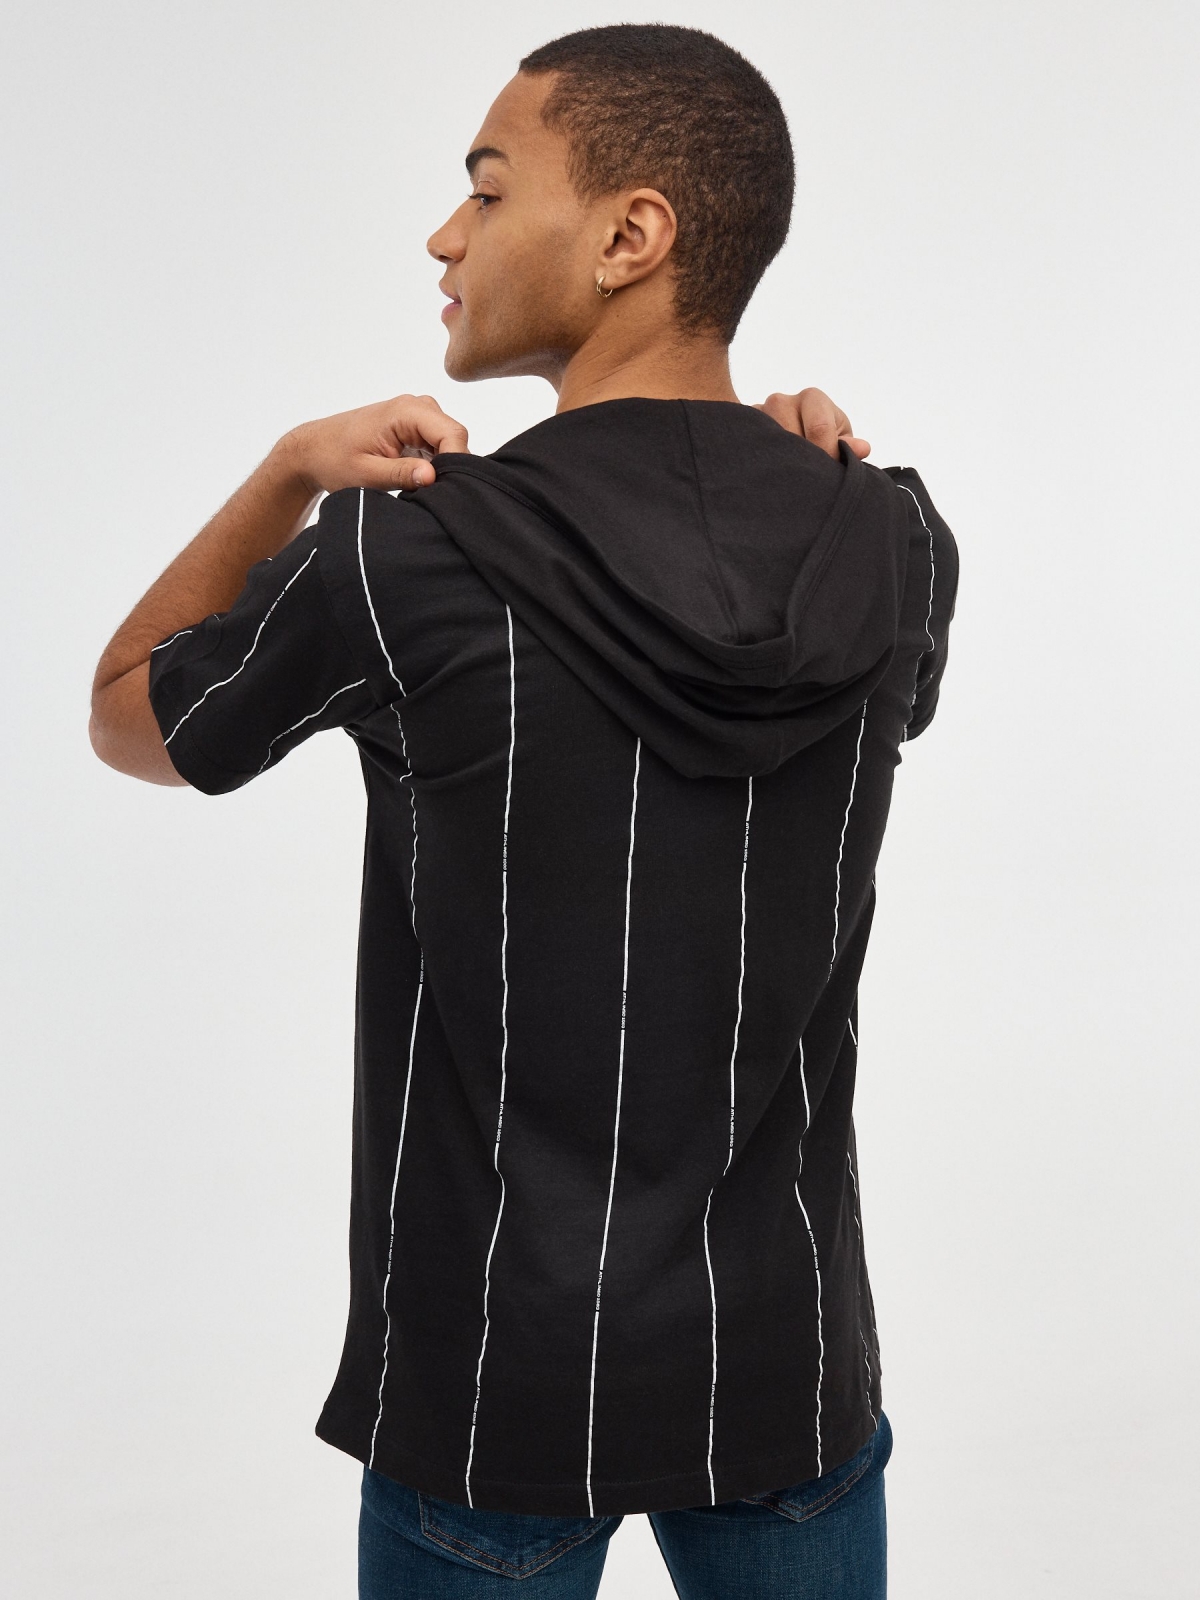 Striped T-shirt with hood black middle back view